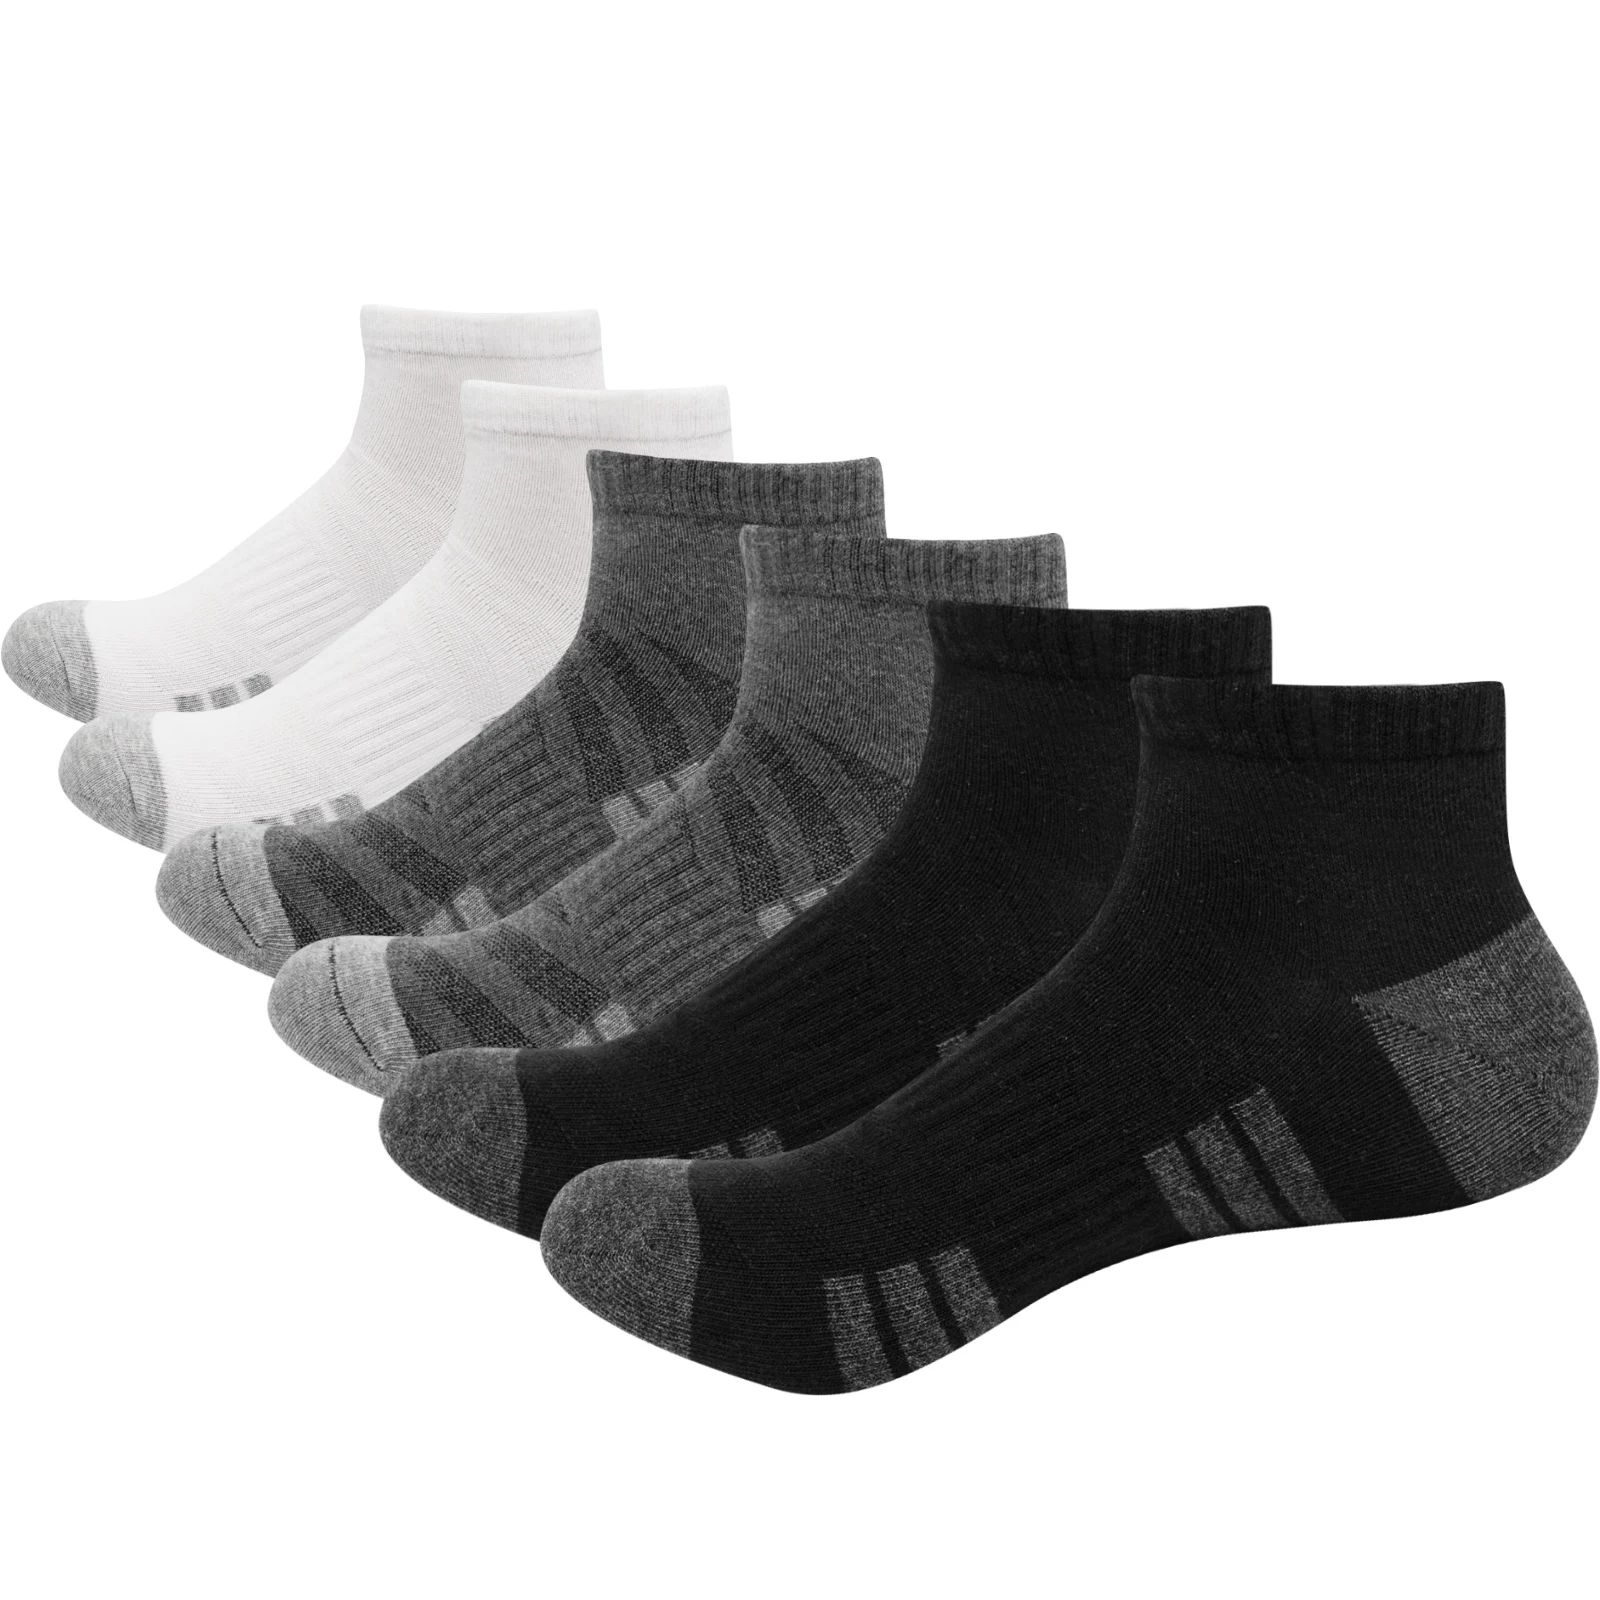 Men Women Cotton Breathable Summer Casual Athletic Ankle Sock